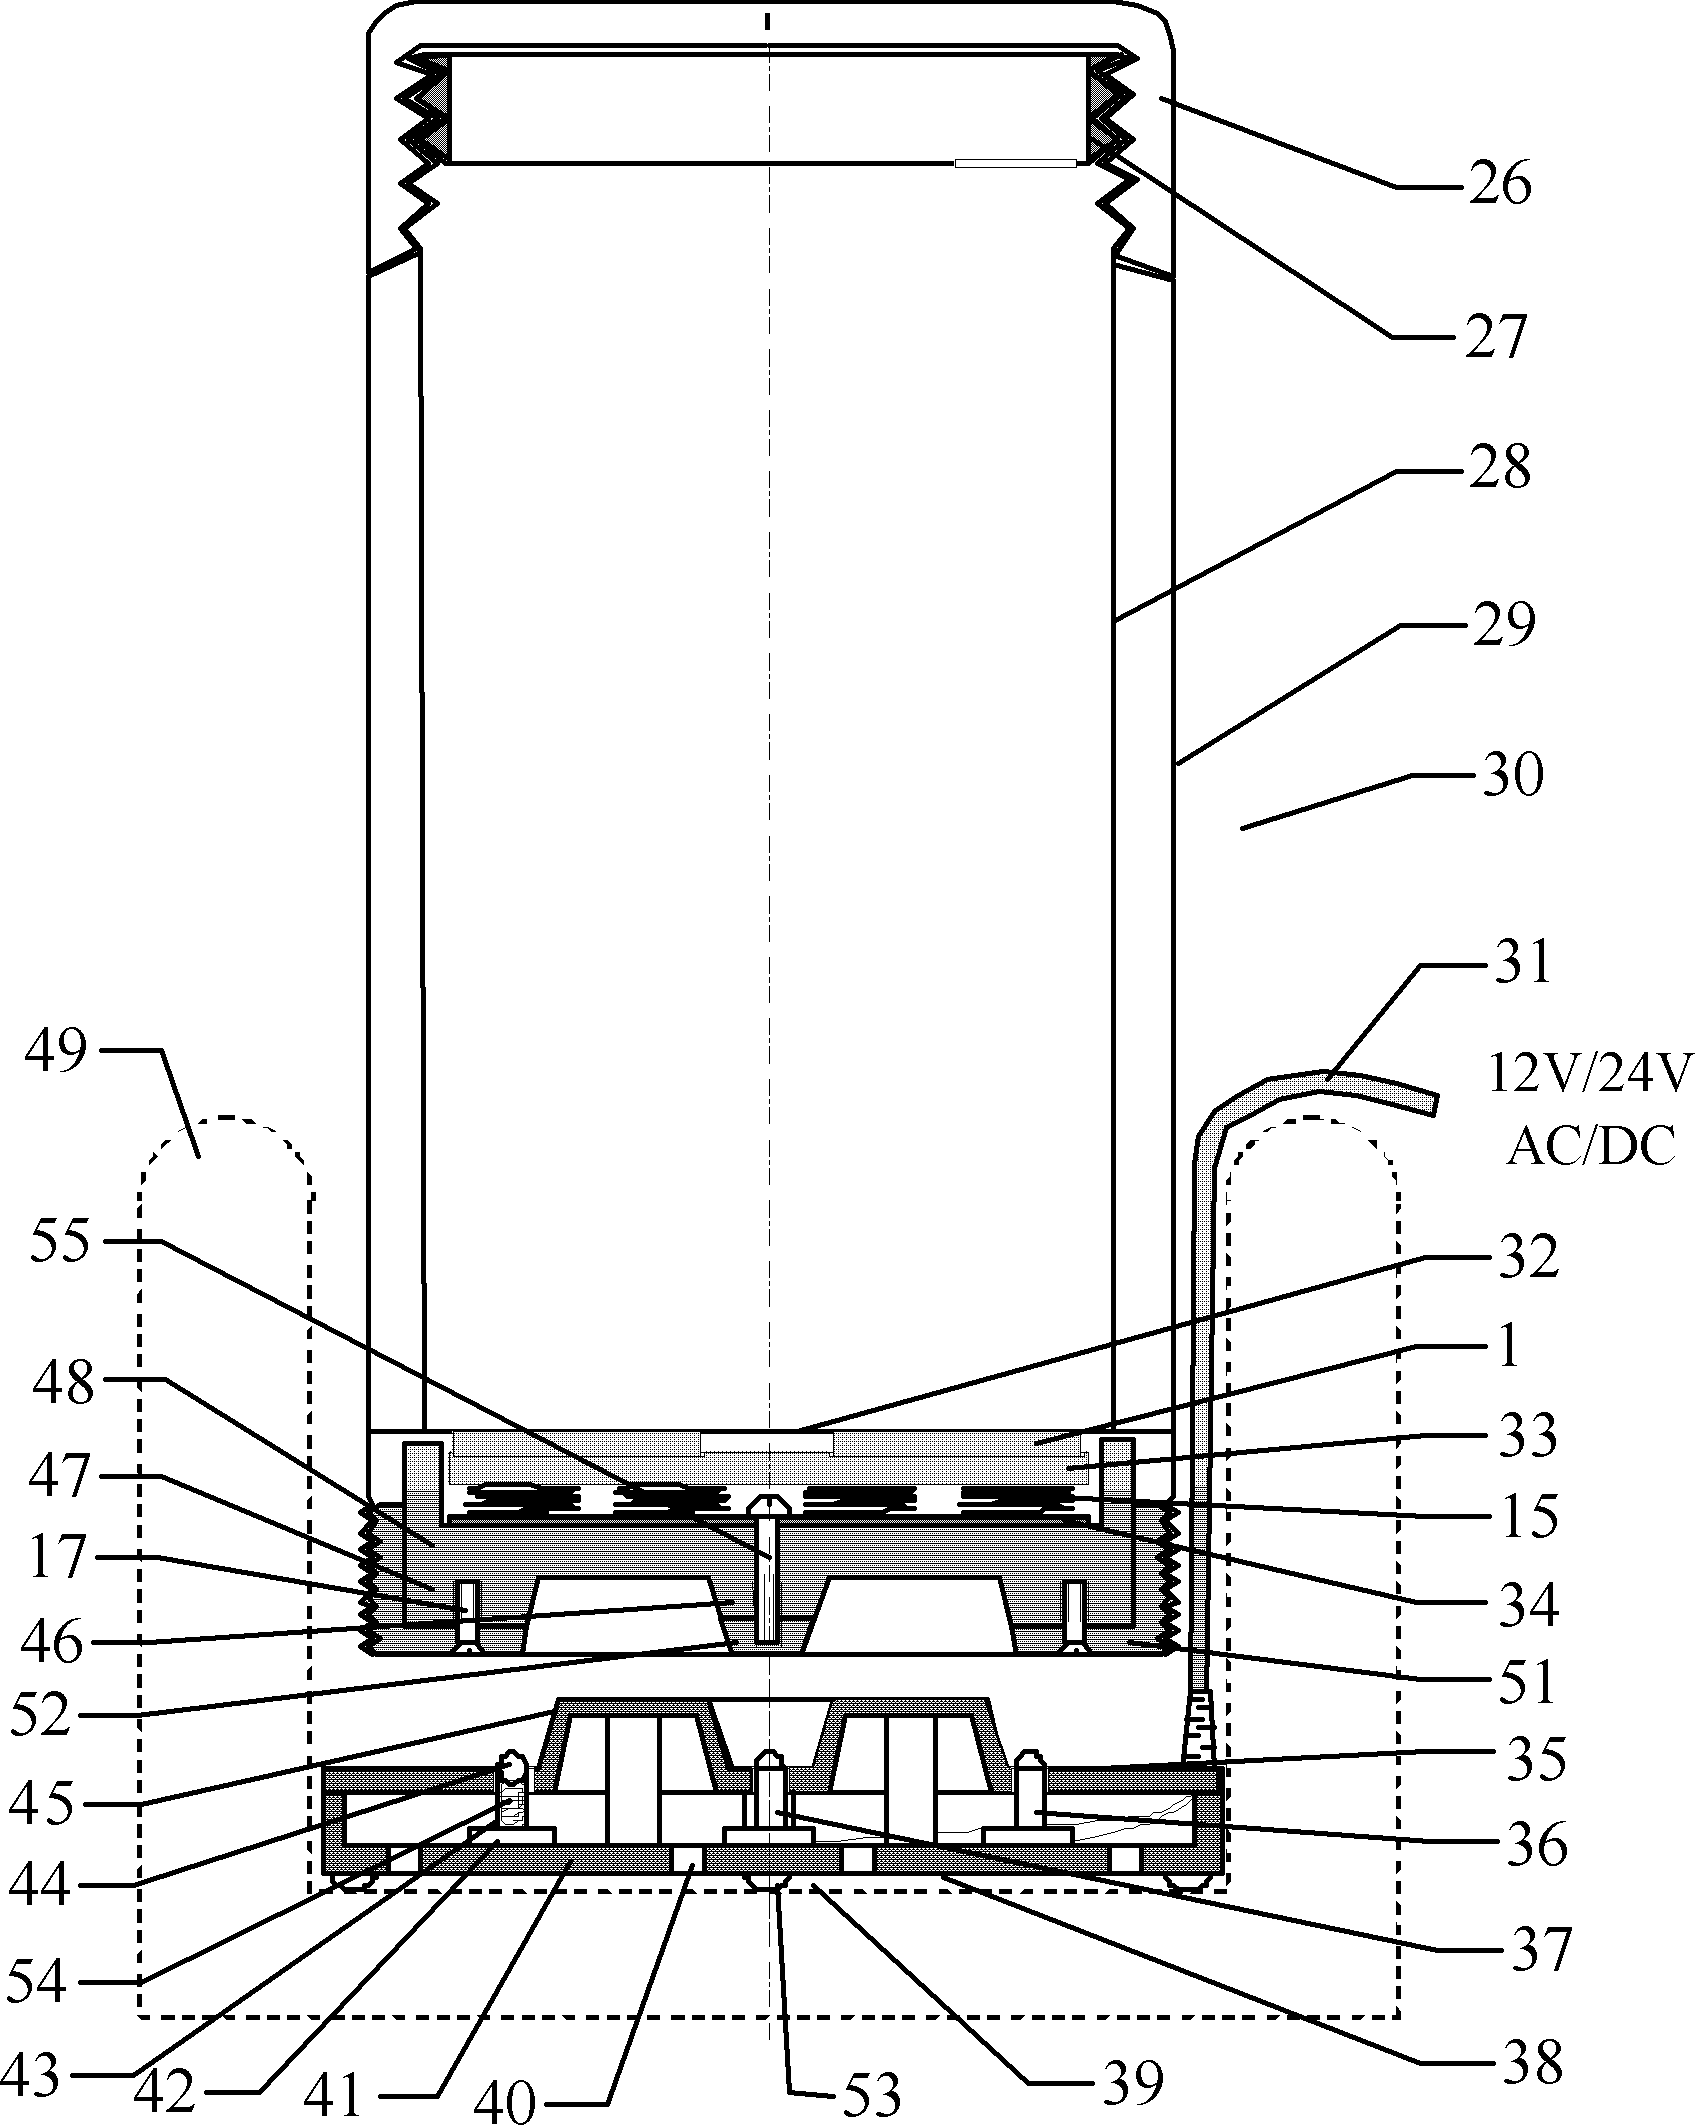 Constant temperature parameter variable electric heating system